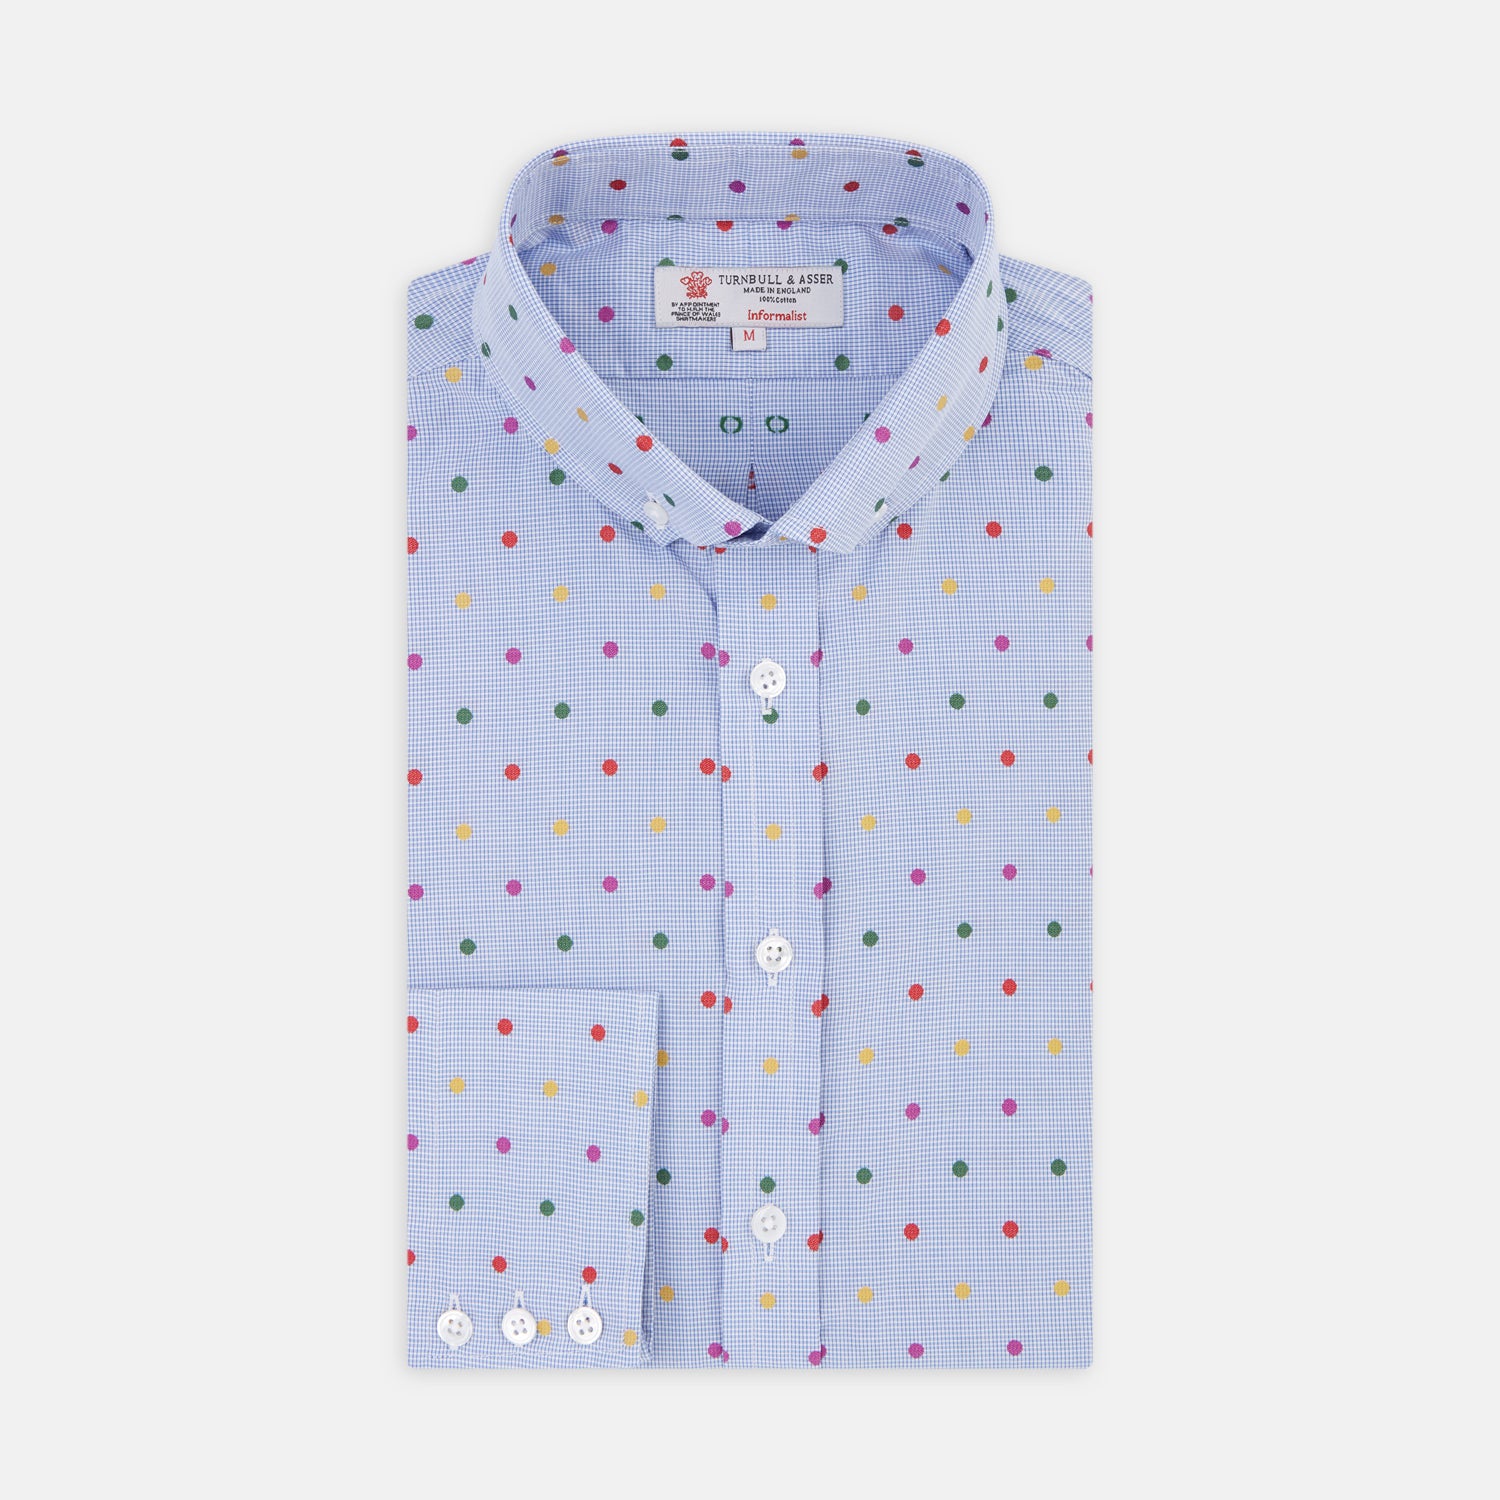 Informalist Blue and Rainbow Spot Embroidered Cotton Shirt with Canonbie Collar